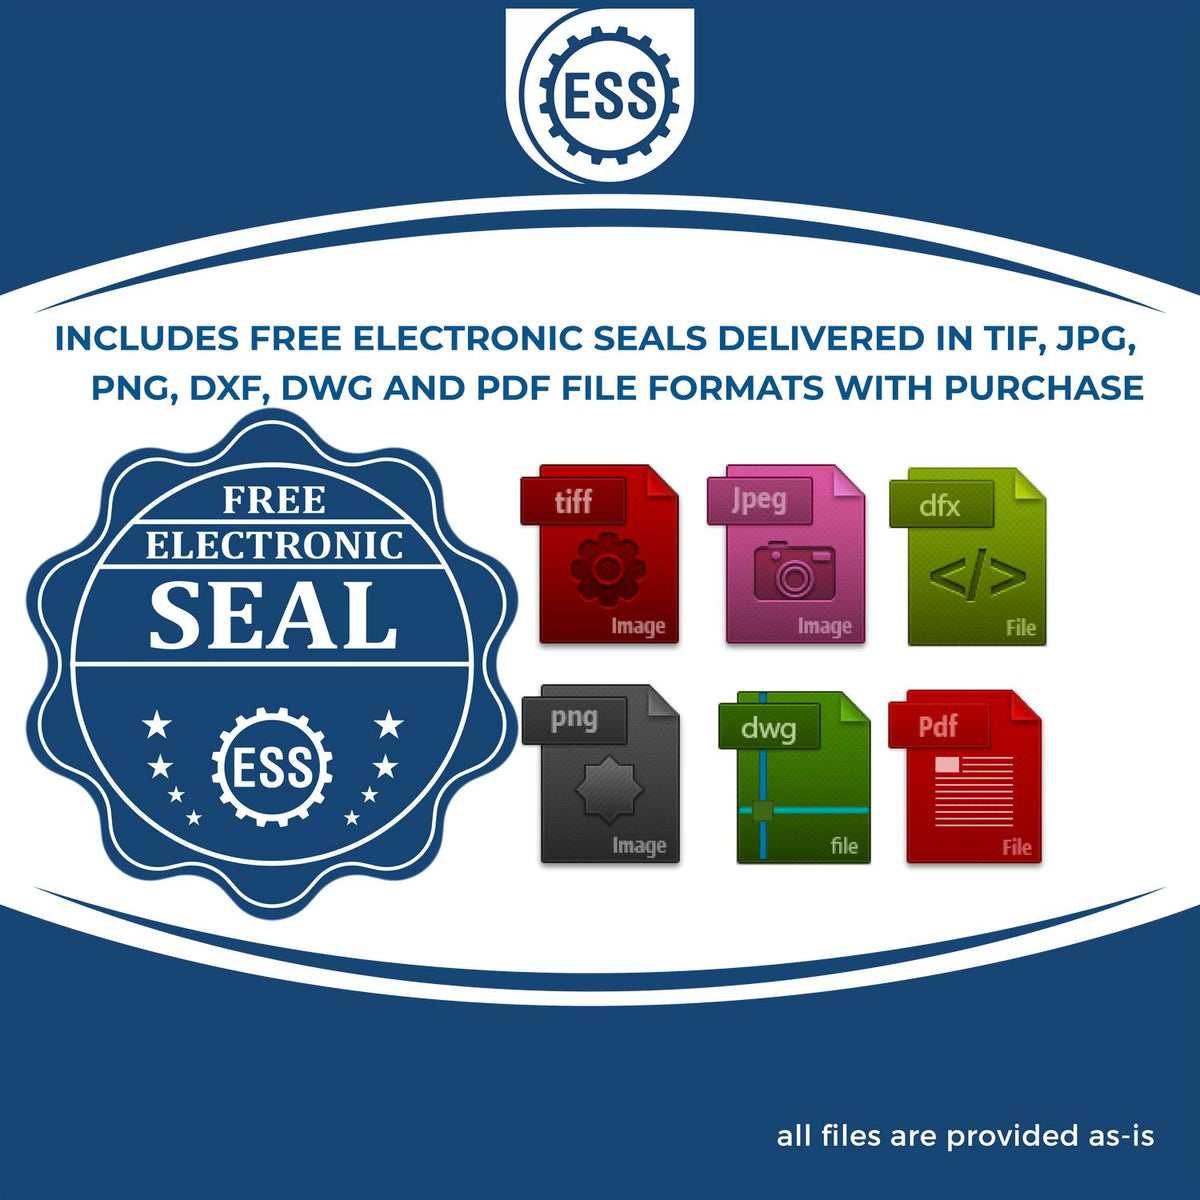 An infographic for the free electronic seal for the Long Reach New Mexico Geology Seal illustrating the different file type icons such as DXF, DWG, TIF, JPG and PNG.